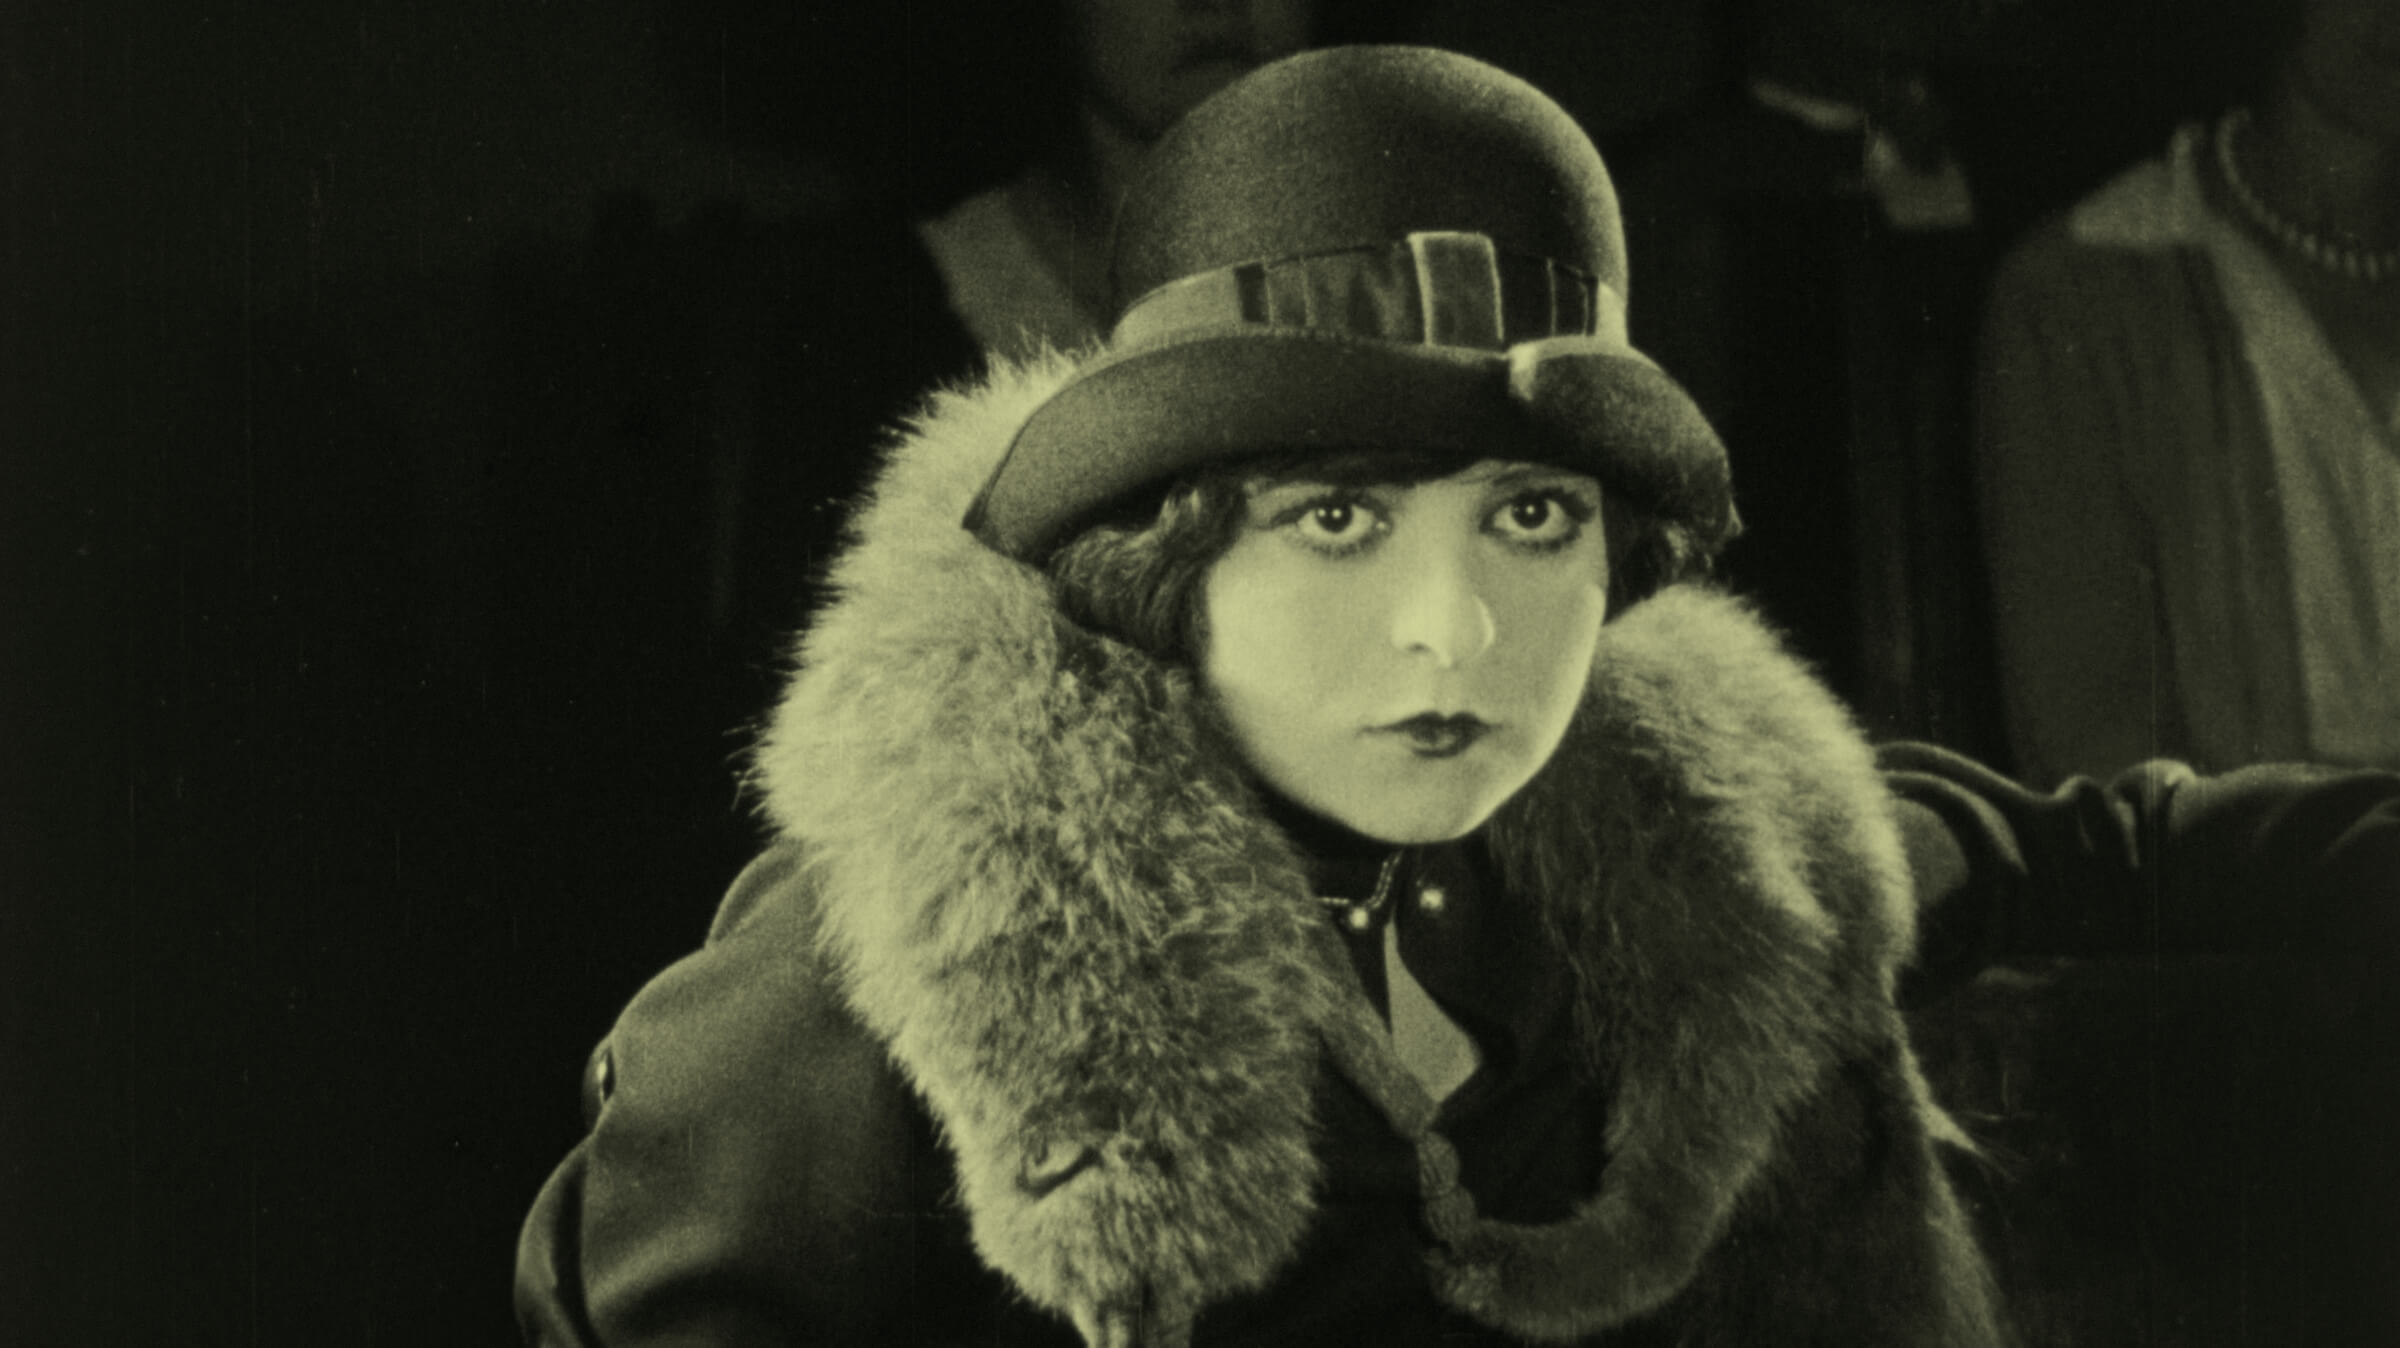 A mono still from the film showing a head and shoulders shot of the heroine.